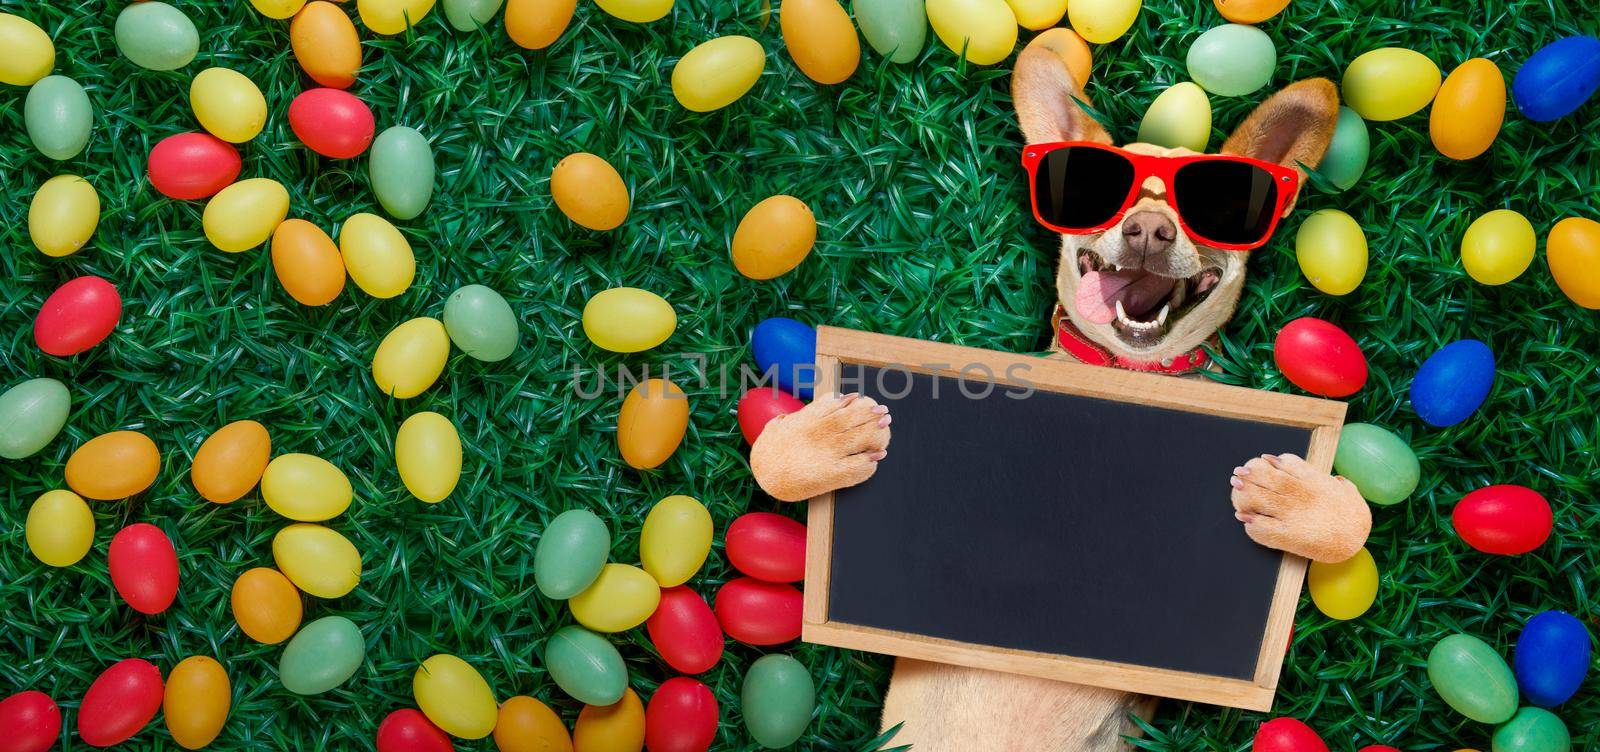 funny  happy podenco  easter bunny  dog with a lot of eggs around and basket  on grass  , holding a blank empty banner or placard